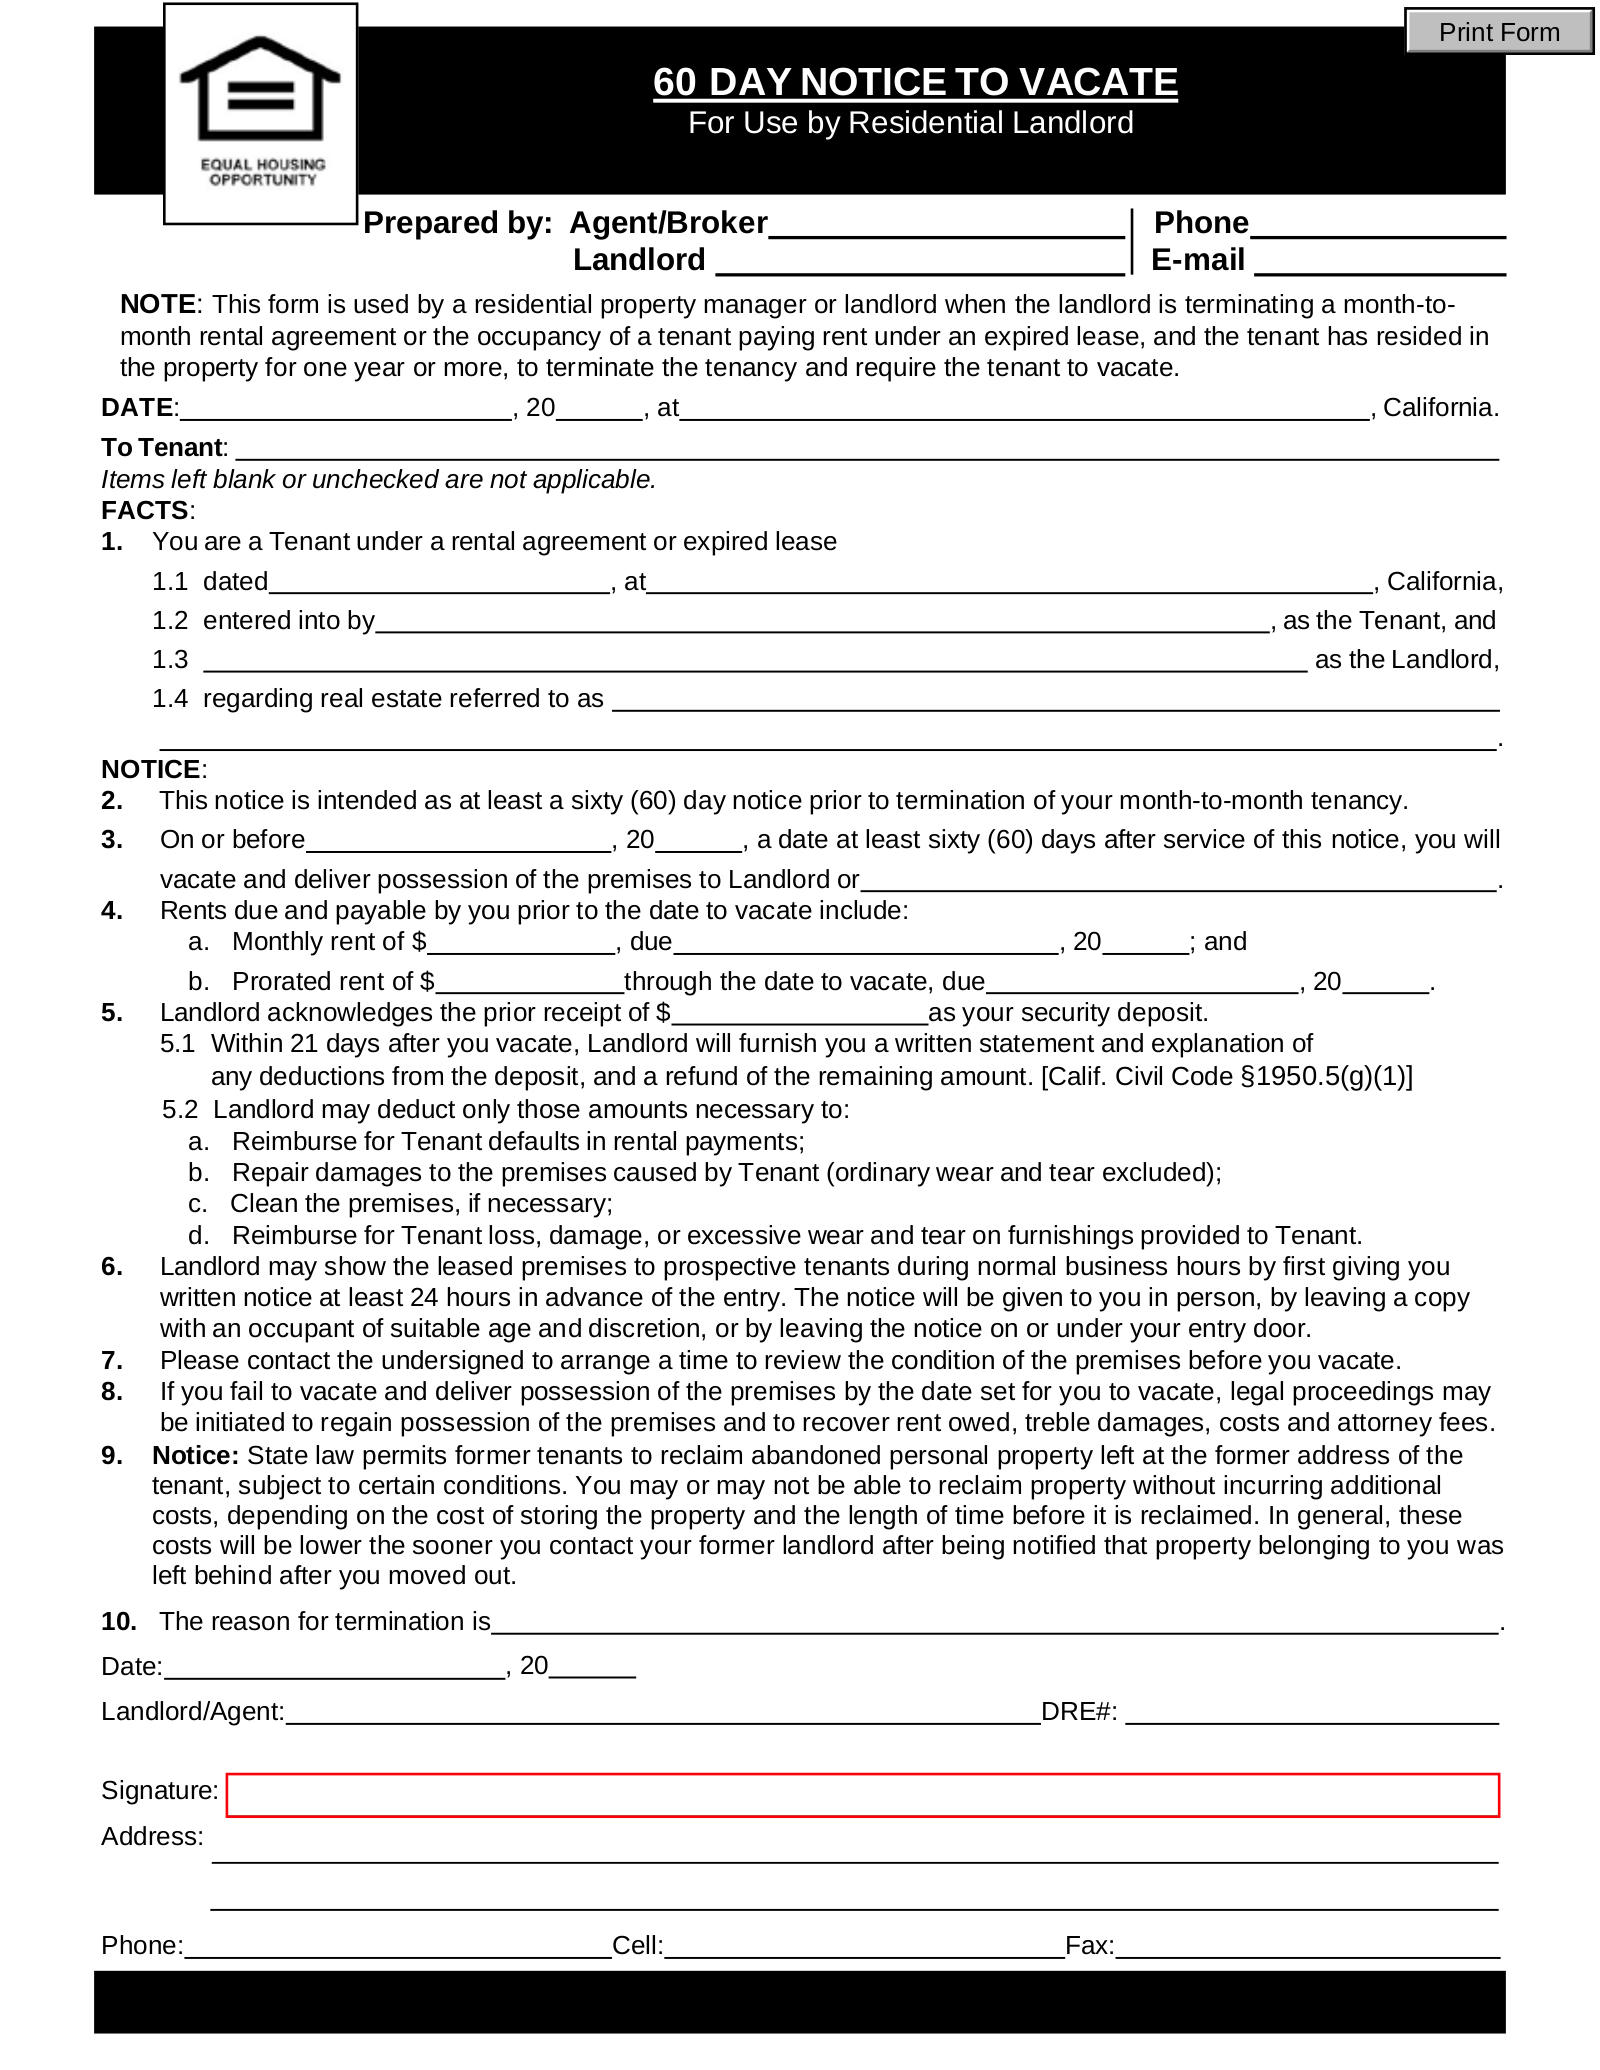 california-lease-termination-letter-form-60-day-notice-eforms